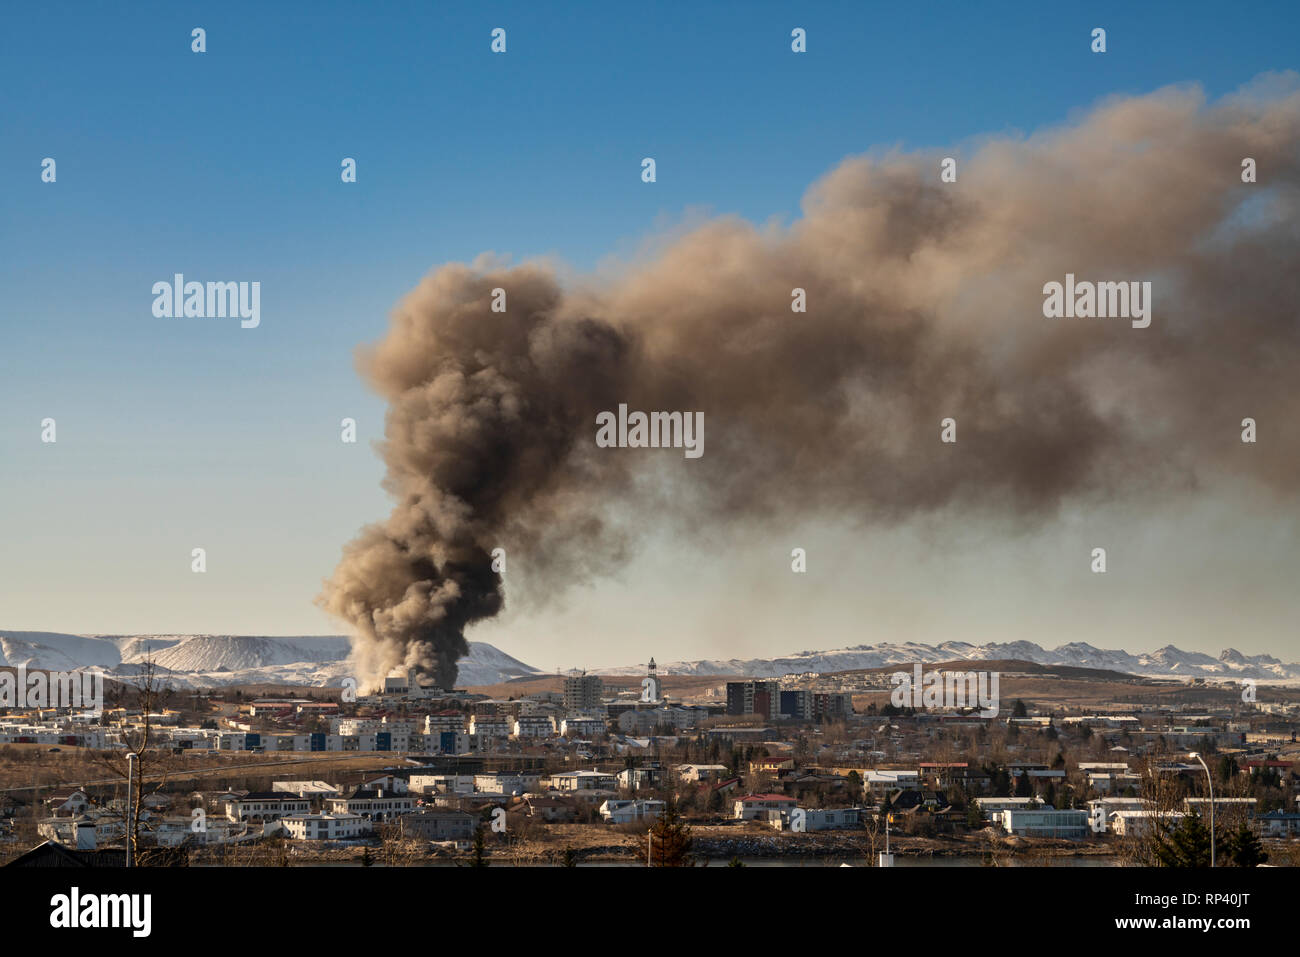 Smoke from a burning building, seen from a distance, Reykjavik, Iceland Stock Photo